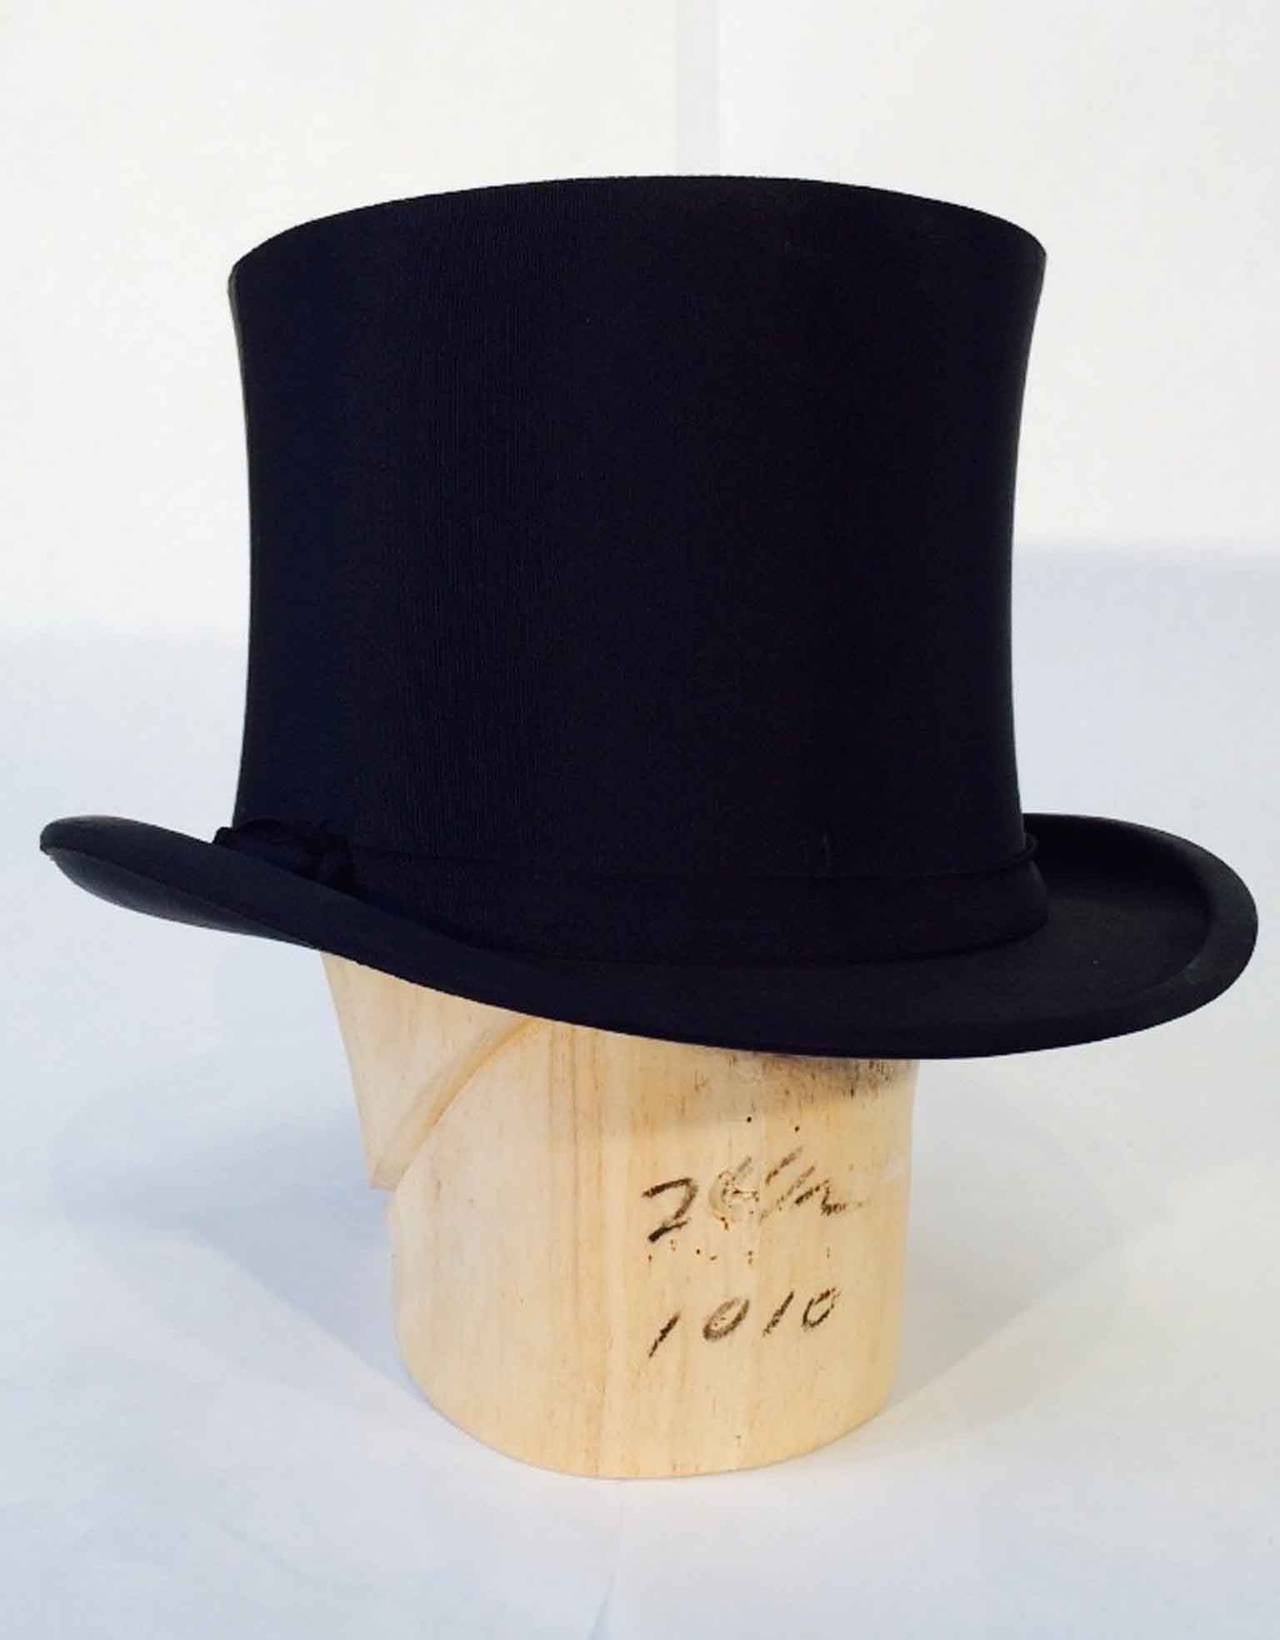 A fine vintage gents silk top hat. Authentic black collaspible item fully silk lined with a matching period hat box. Hat measures 6